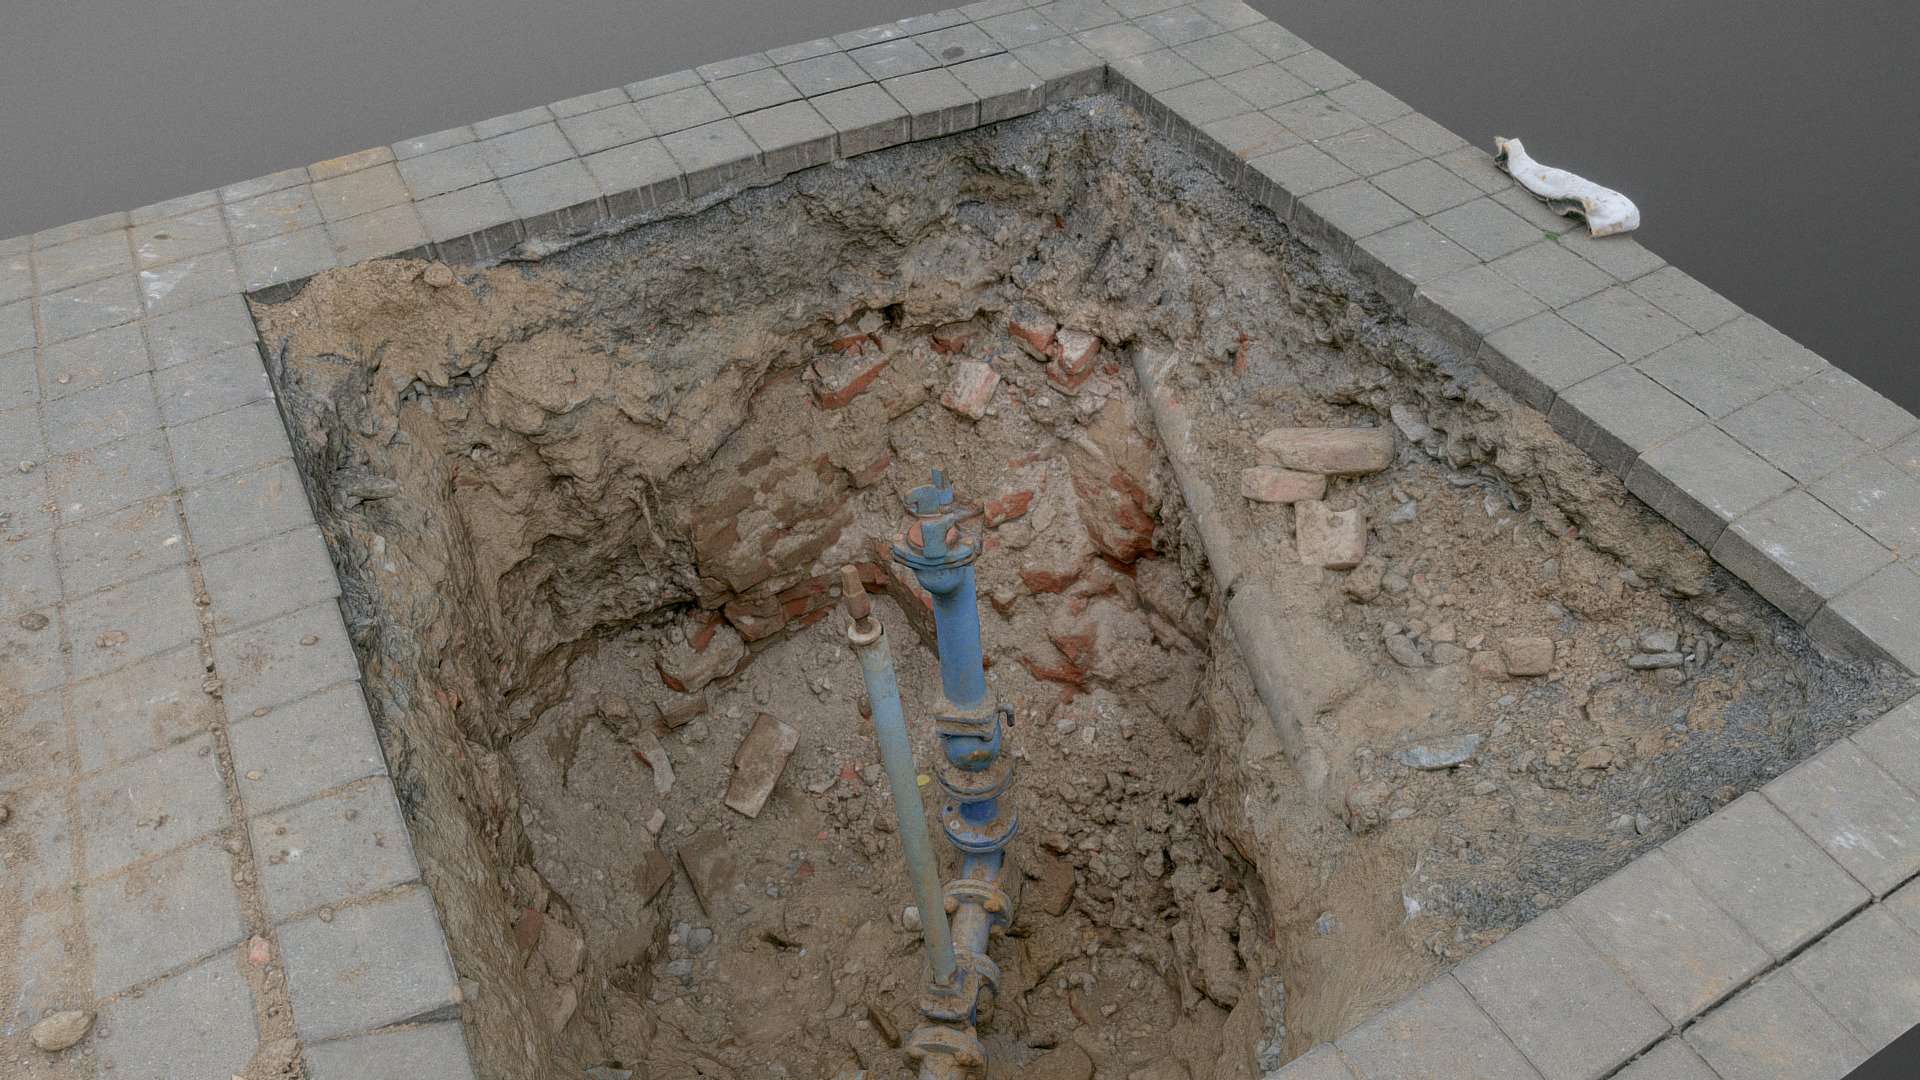 Construction dig site excavation, water pipe pipeline street reconstruction ground earth work inspection

Raw photogrammetry scan (180x36MP), 4x8K texture - Water pipeline dig - Buy Royalty Free 3D model by matousekfoto 3d model